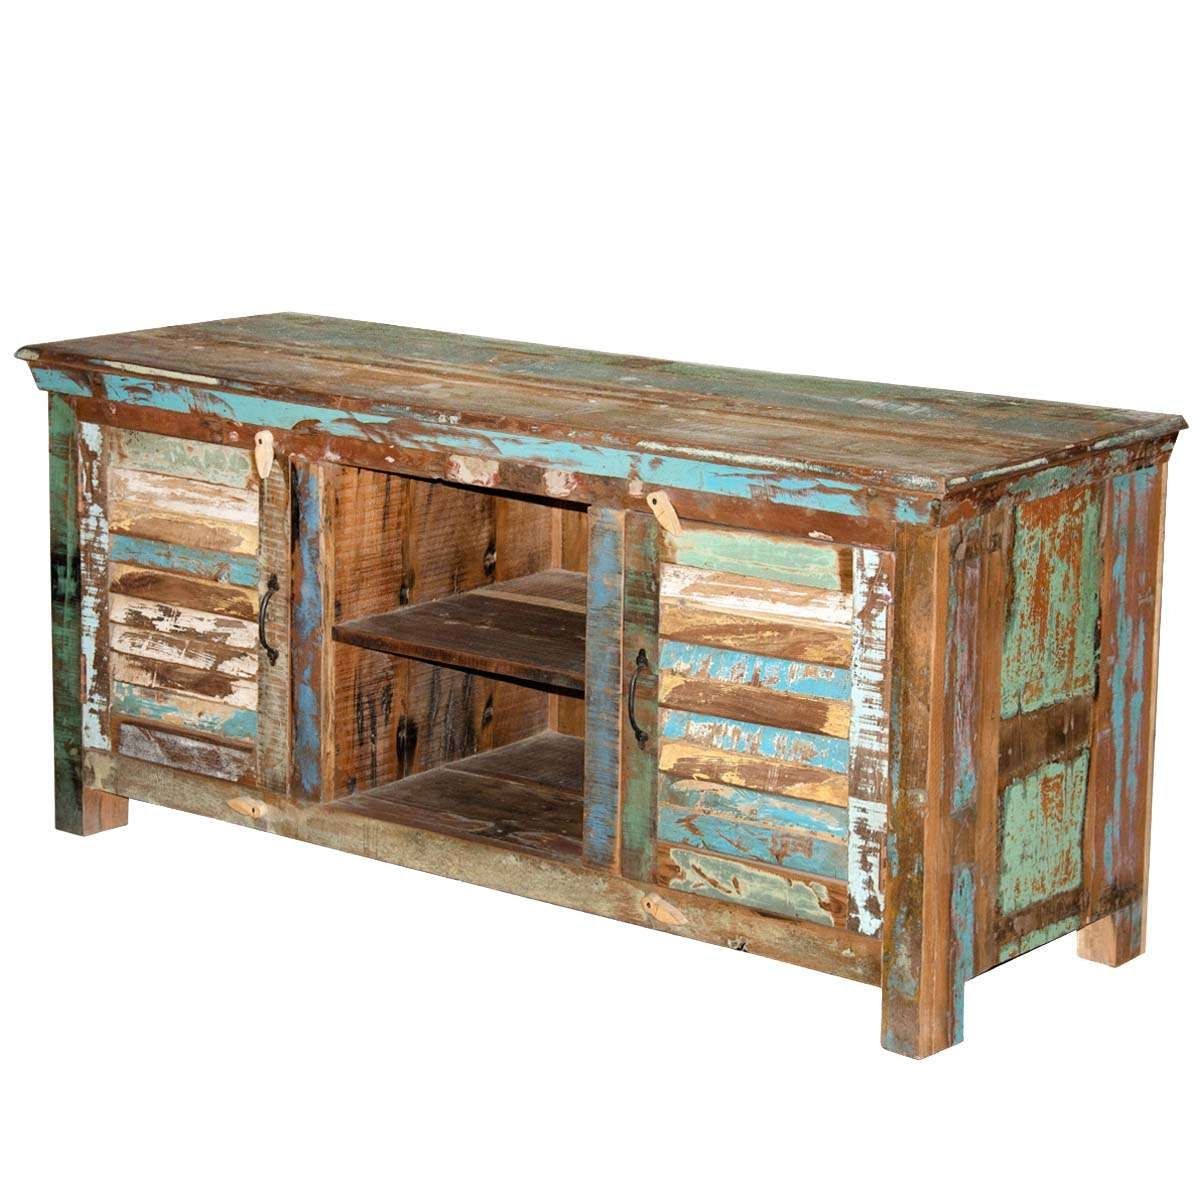 Rustic Shutter Doors Reclaimed Wood Tv Stand Media Console Within Wooden Tv Stands (View 4 of 15)